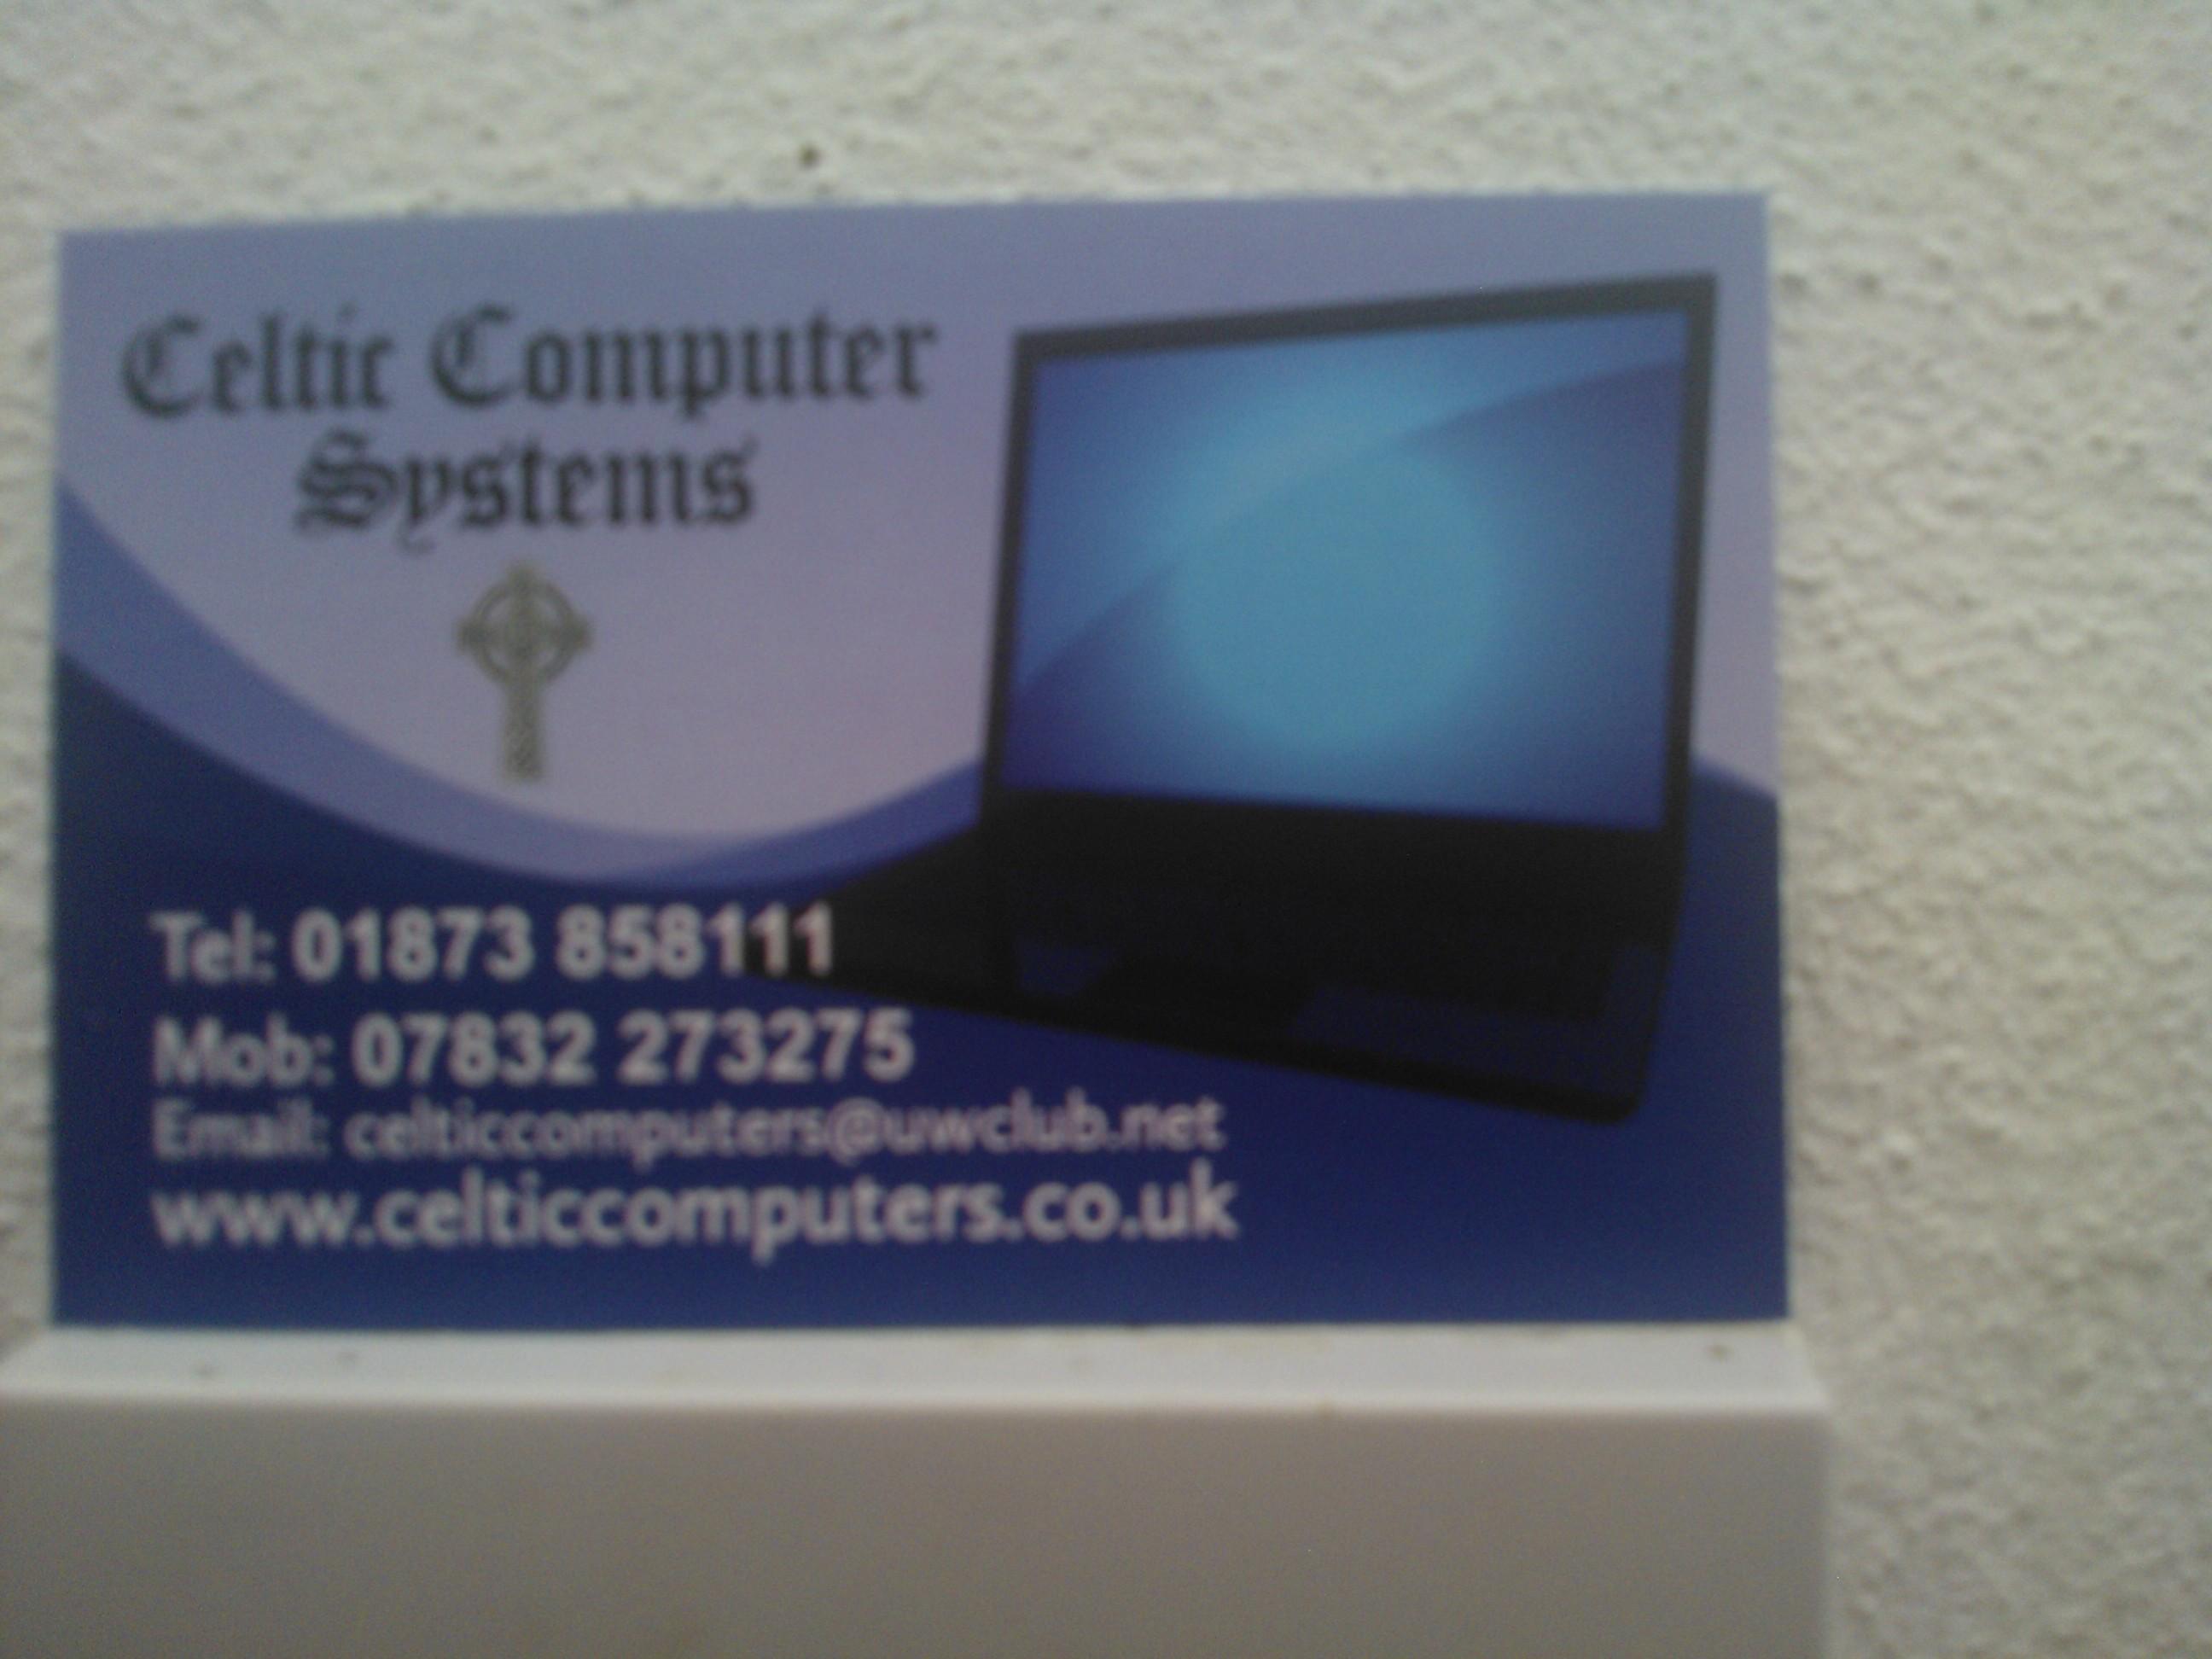 Local Computer Business